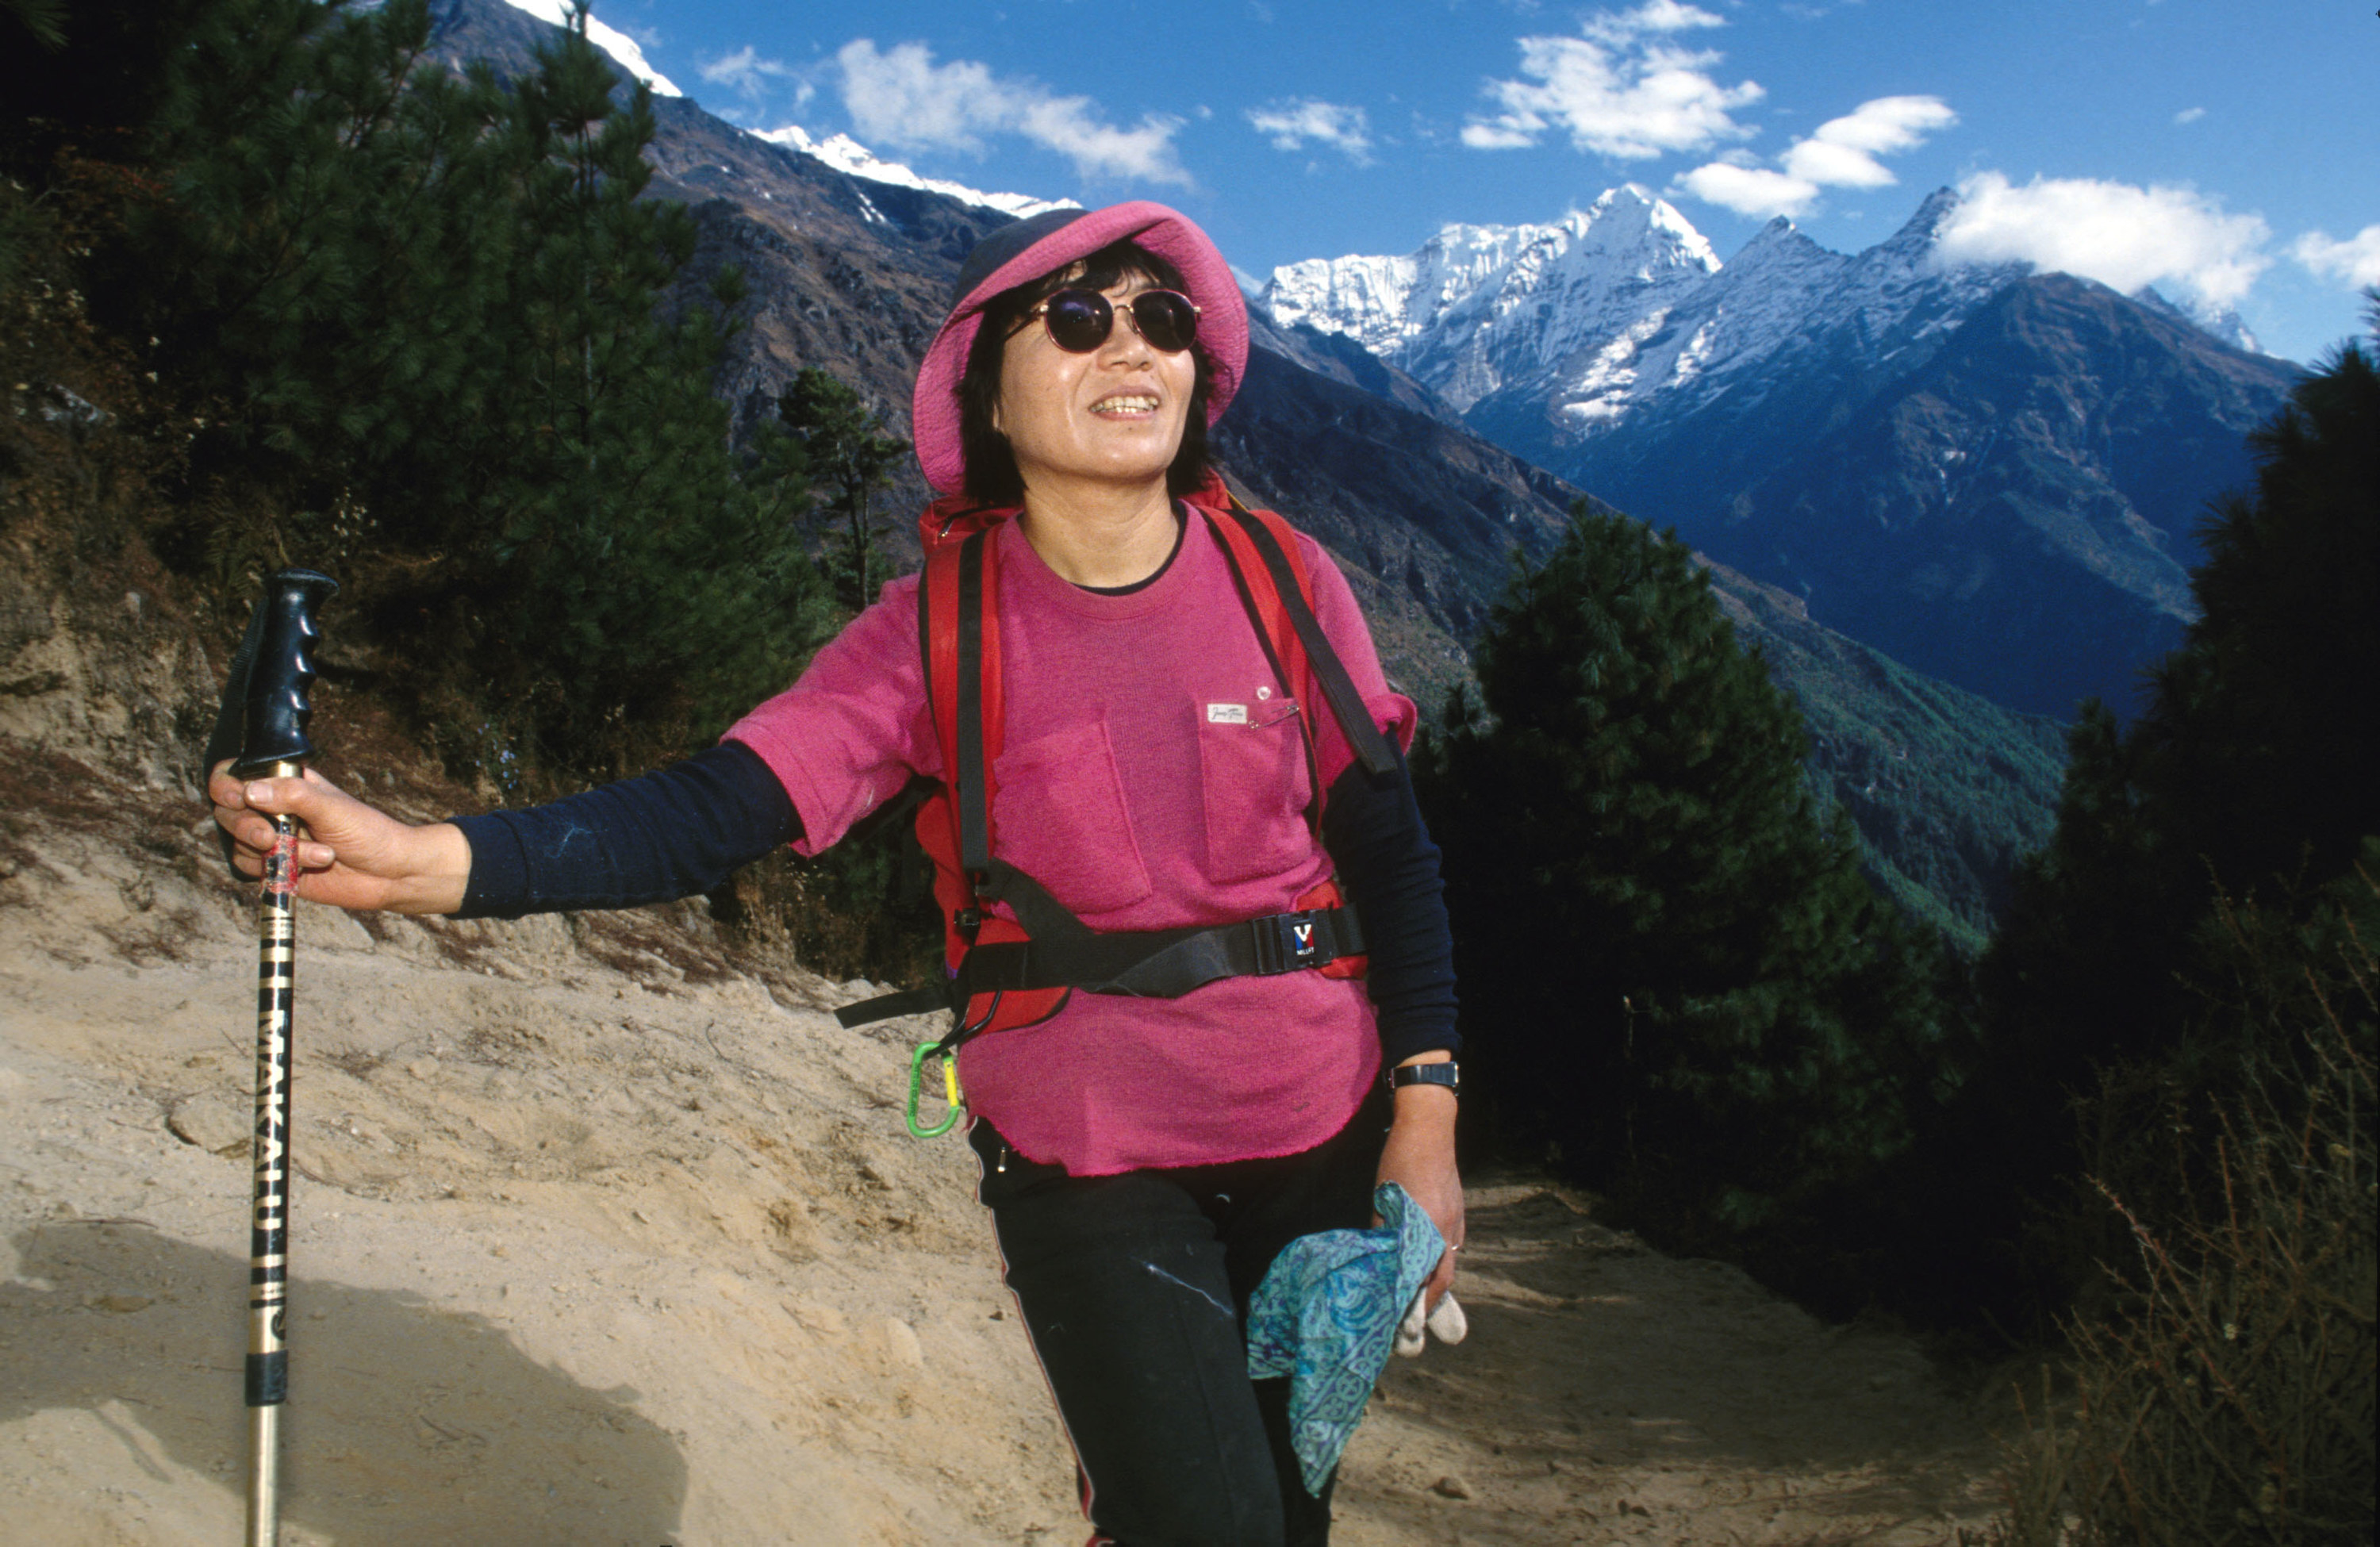 Junko Tabei wearing a backpack and holding a walking pole. She wears a hat and sunglasses and smiles as she looks ahead, a mountain scape behind her